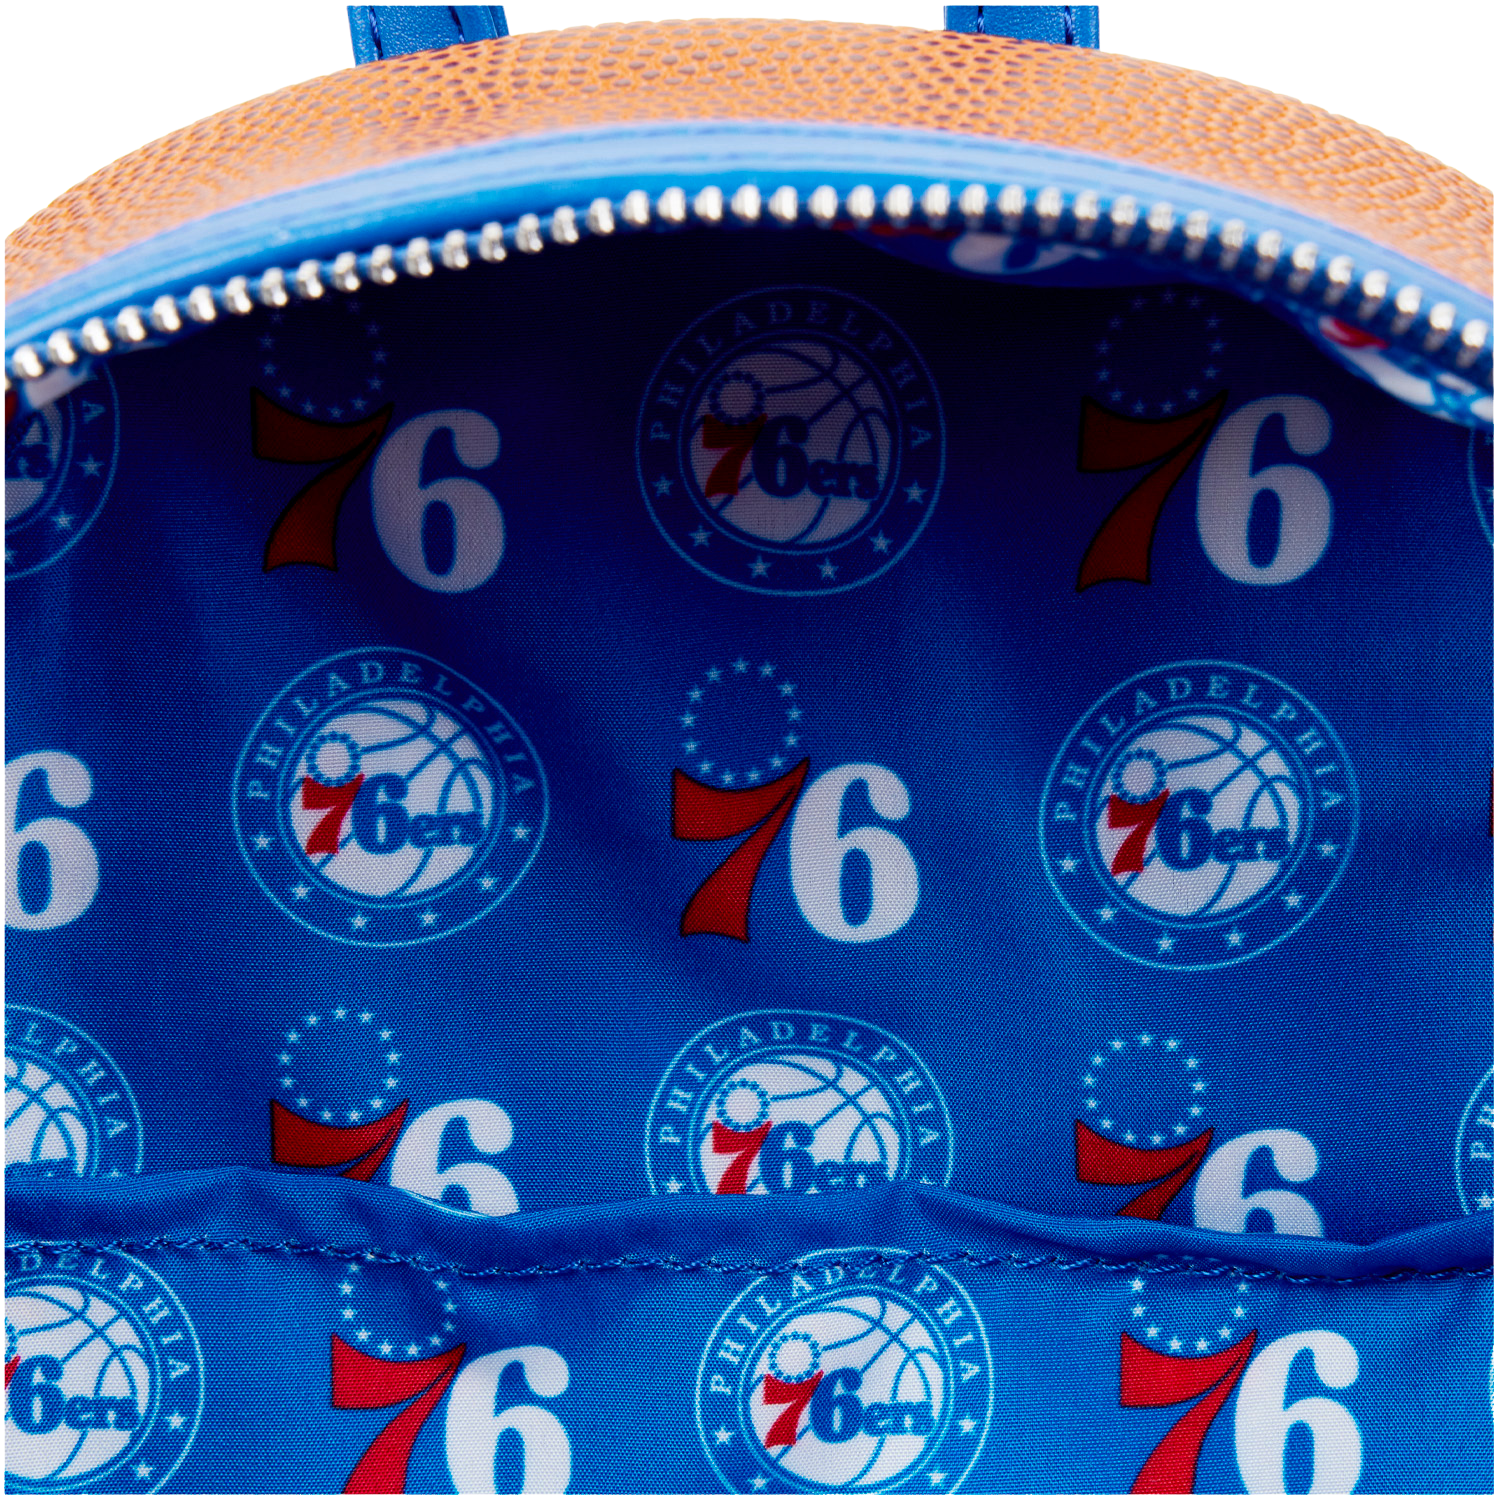 Loungefly NBA Philly 76ers Basketball Mini Backpack